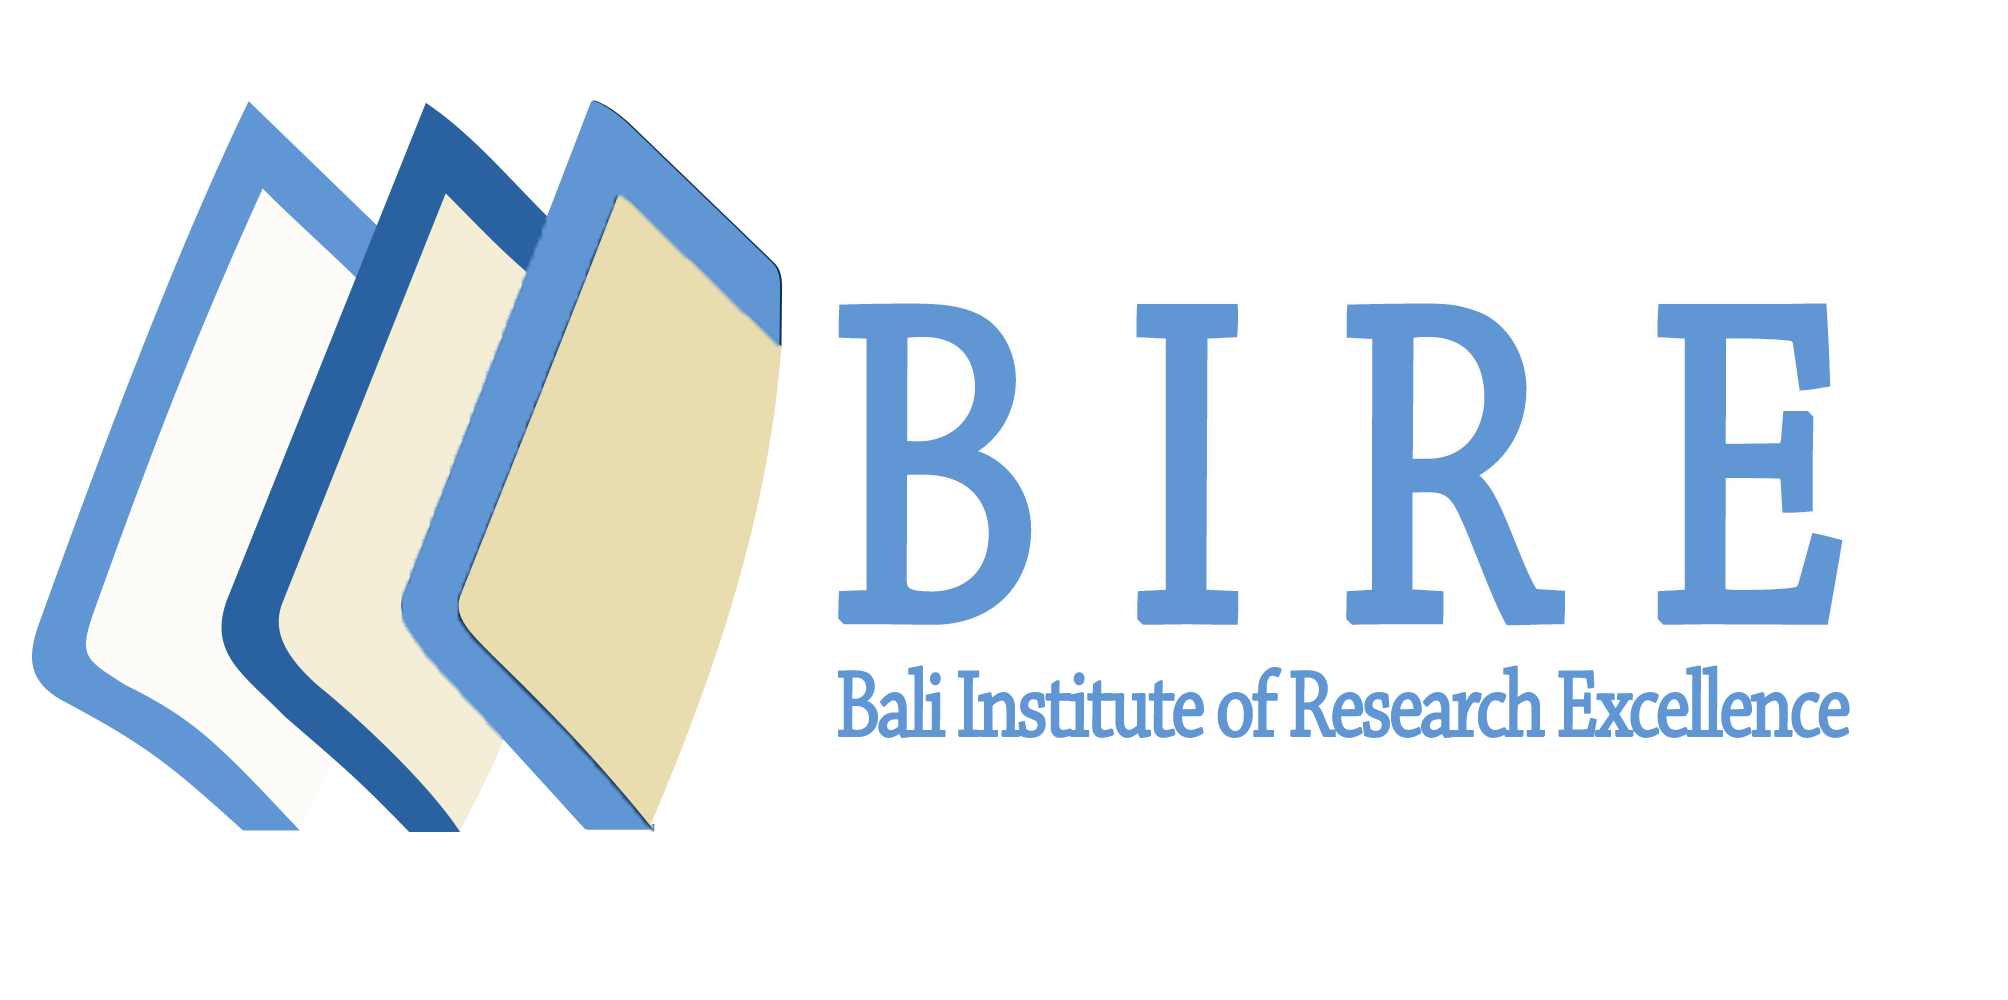 RBSEIT-2023 2023 International Conference on Current Research in Business Management, Social Sciences, Economics and Information Technology